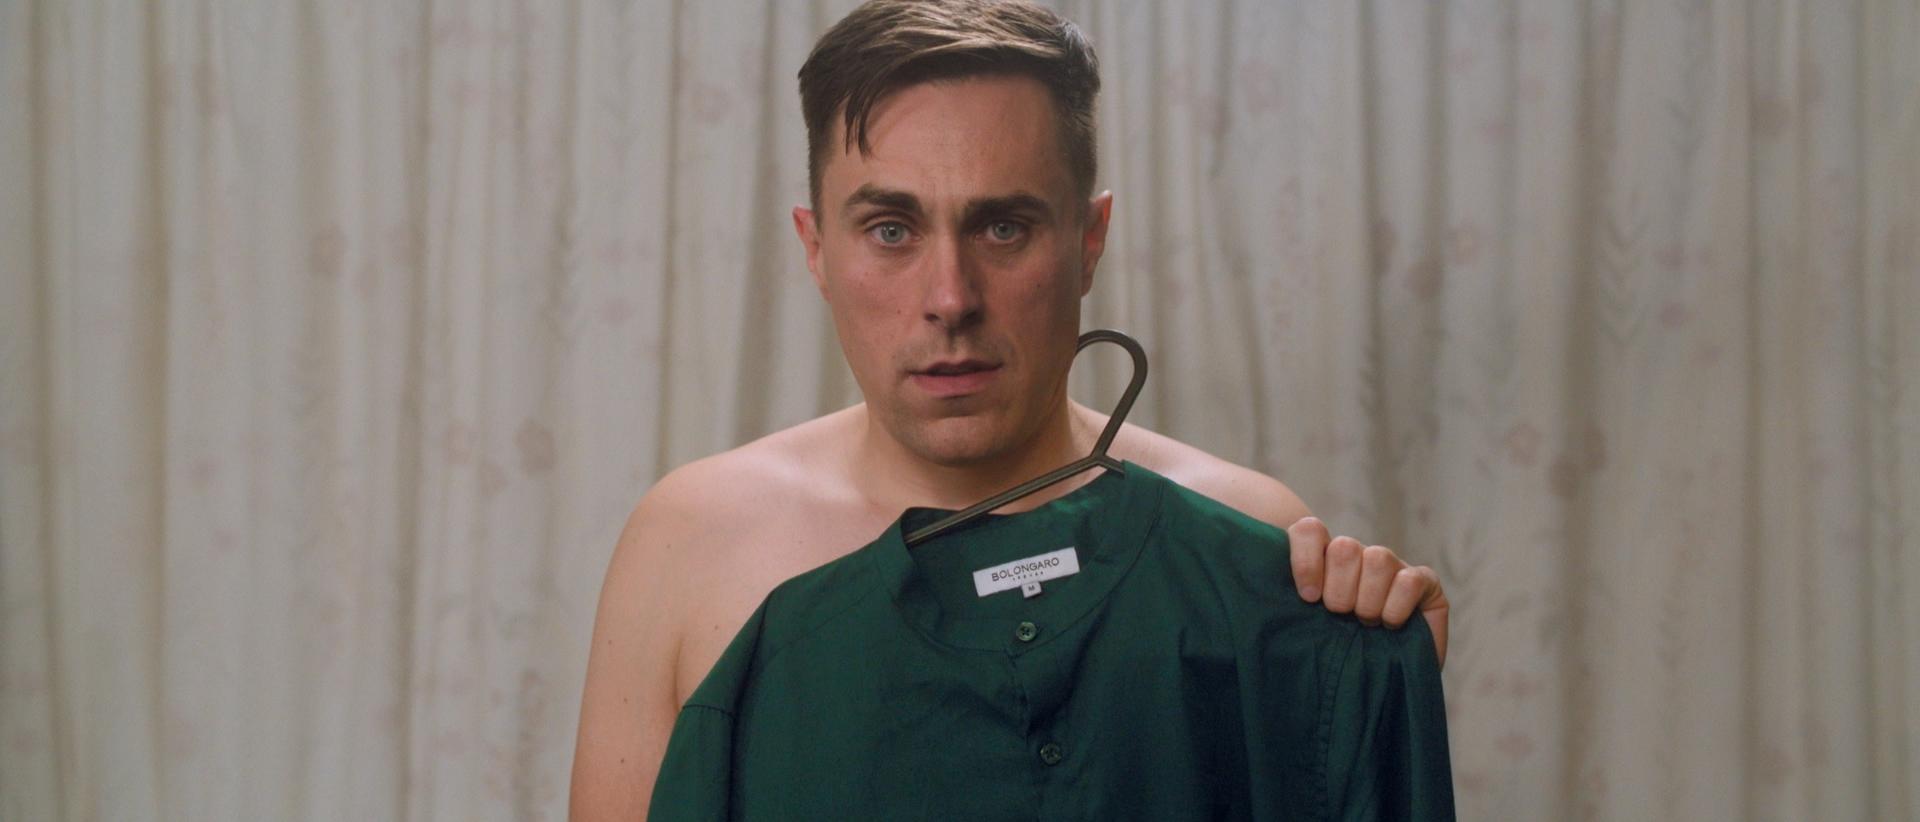 a man stands in a changing room holding a dark green shirt over his torso and staring into camera